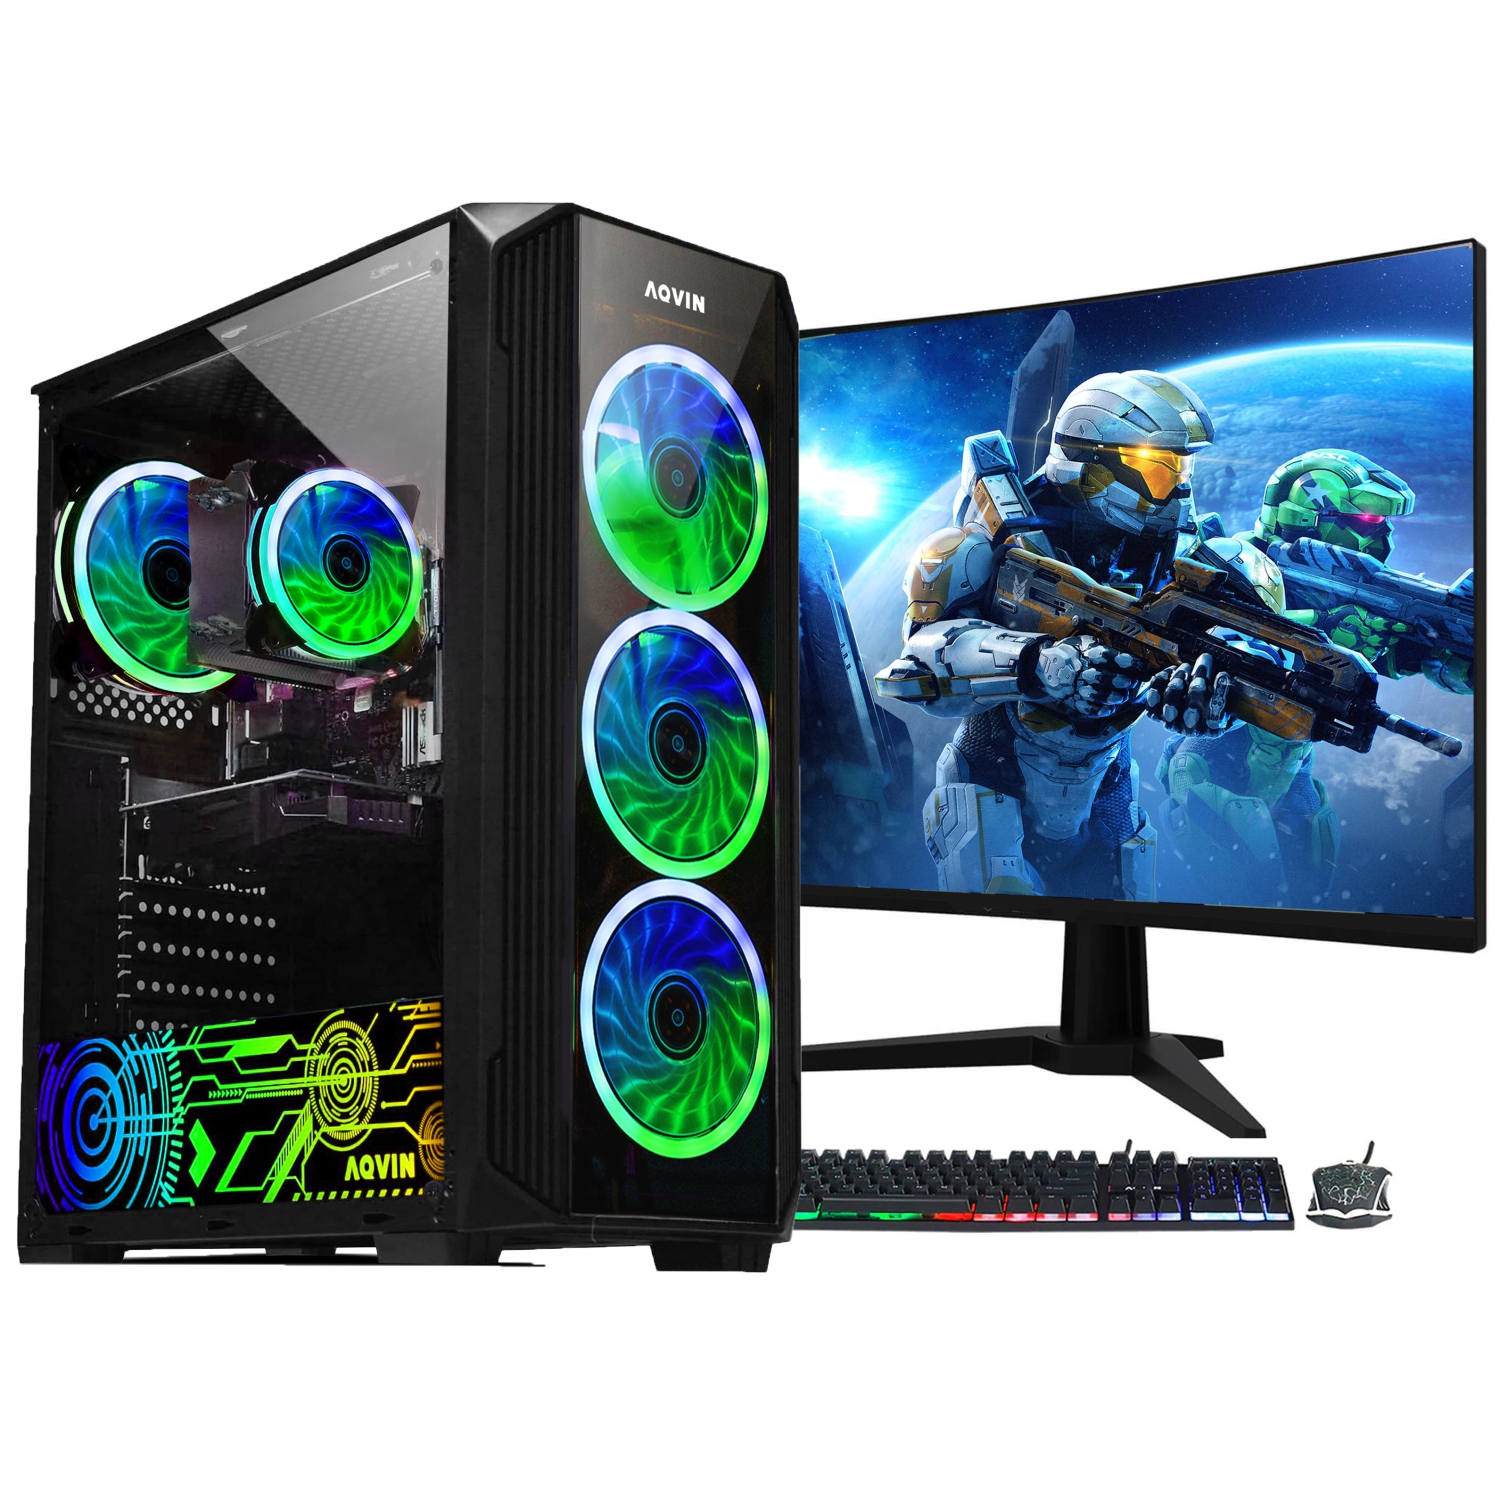 Refurbished(Excellent) AQVIN Gaming PC Desktop Computer Tower (Intel i7/1TB SSD/32GB RAM/GeForce RTX 3060 12GB/Windows 10 Pro) New 27 inch Curved Gaming Monitor - Only at Best Buy